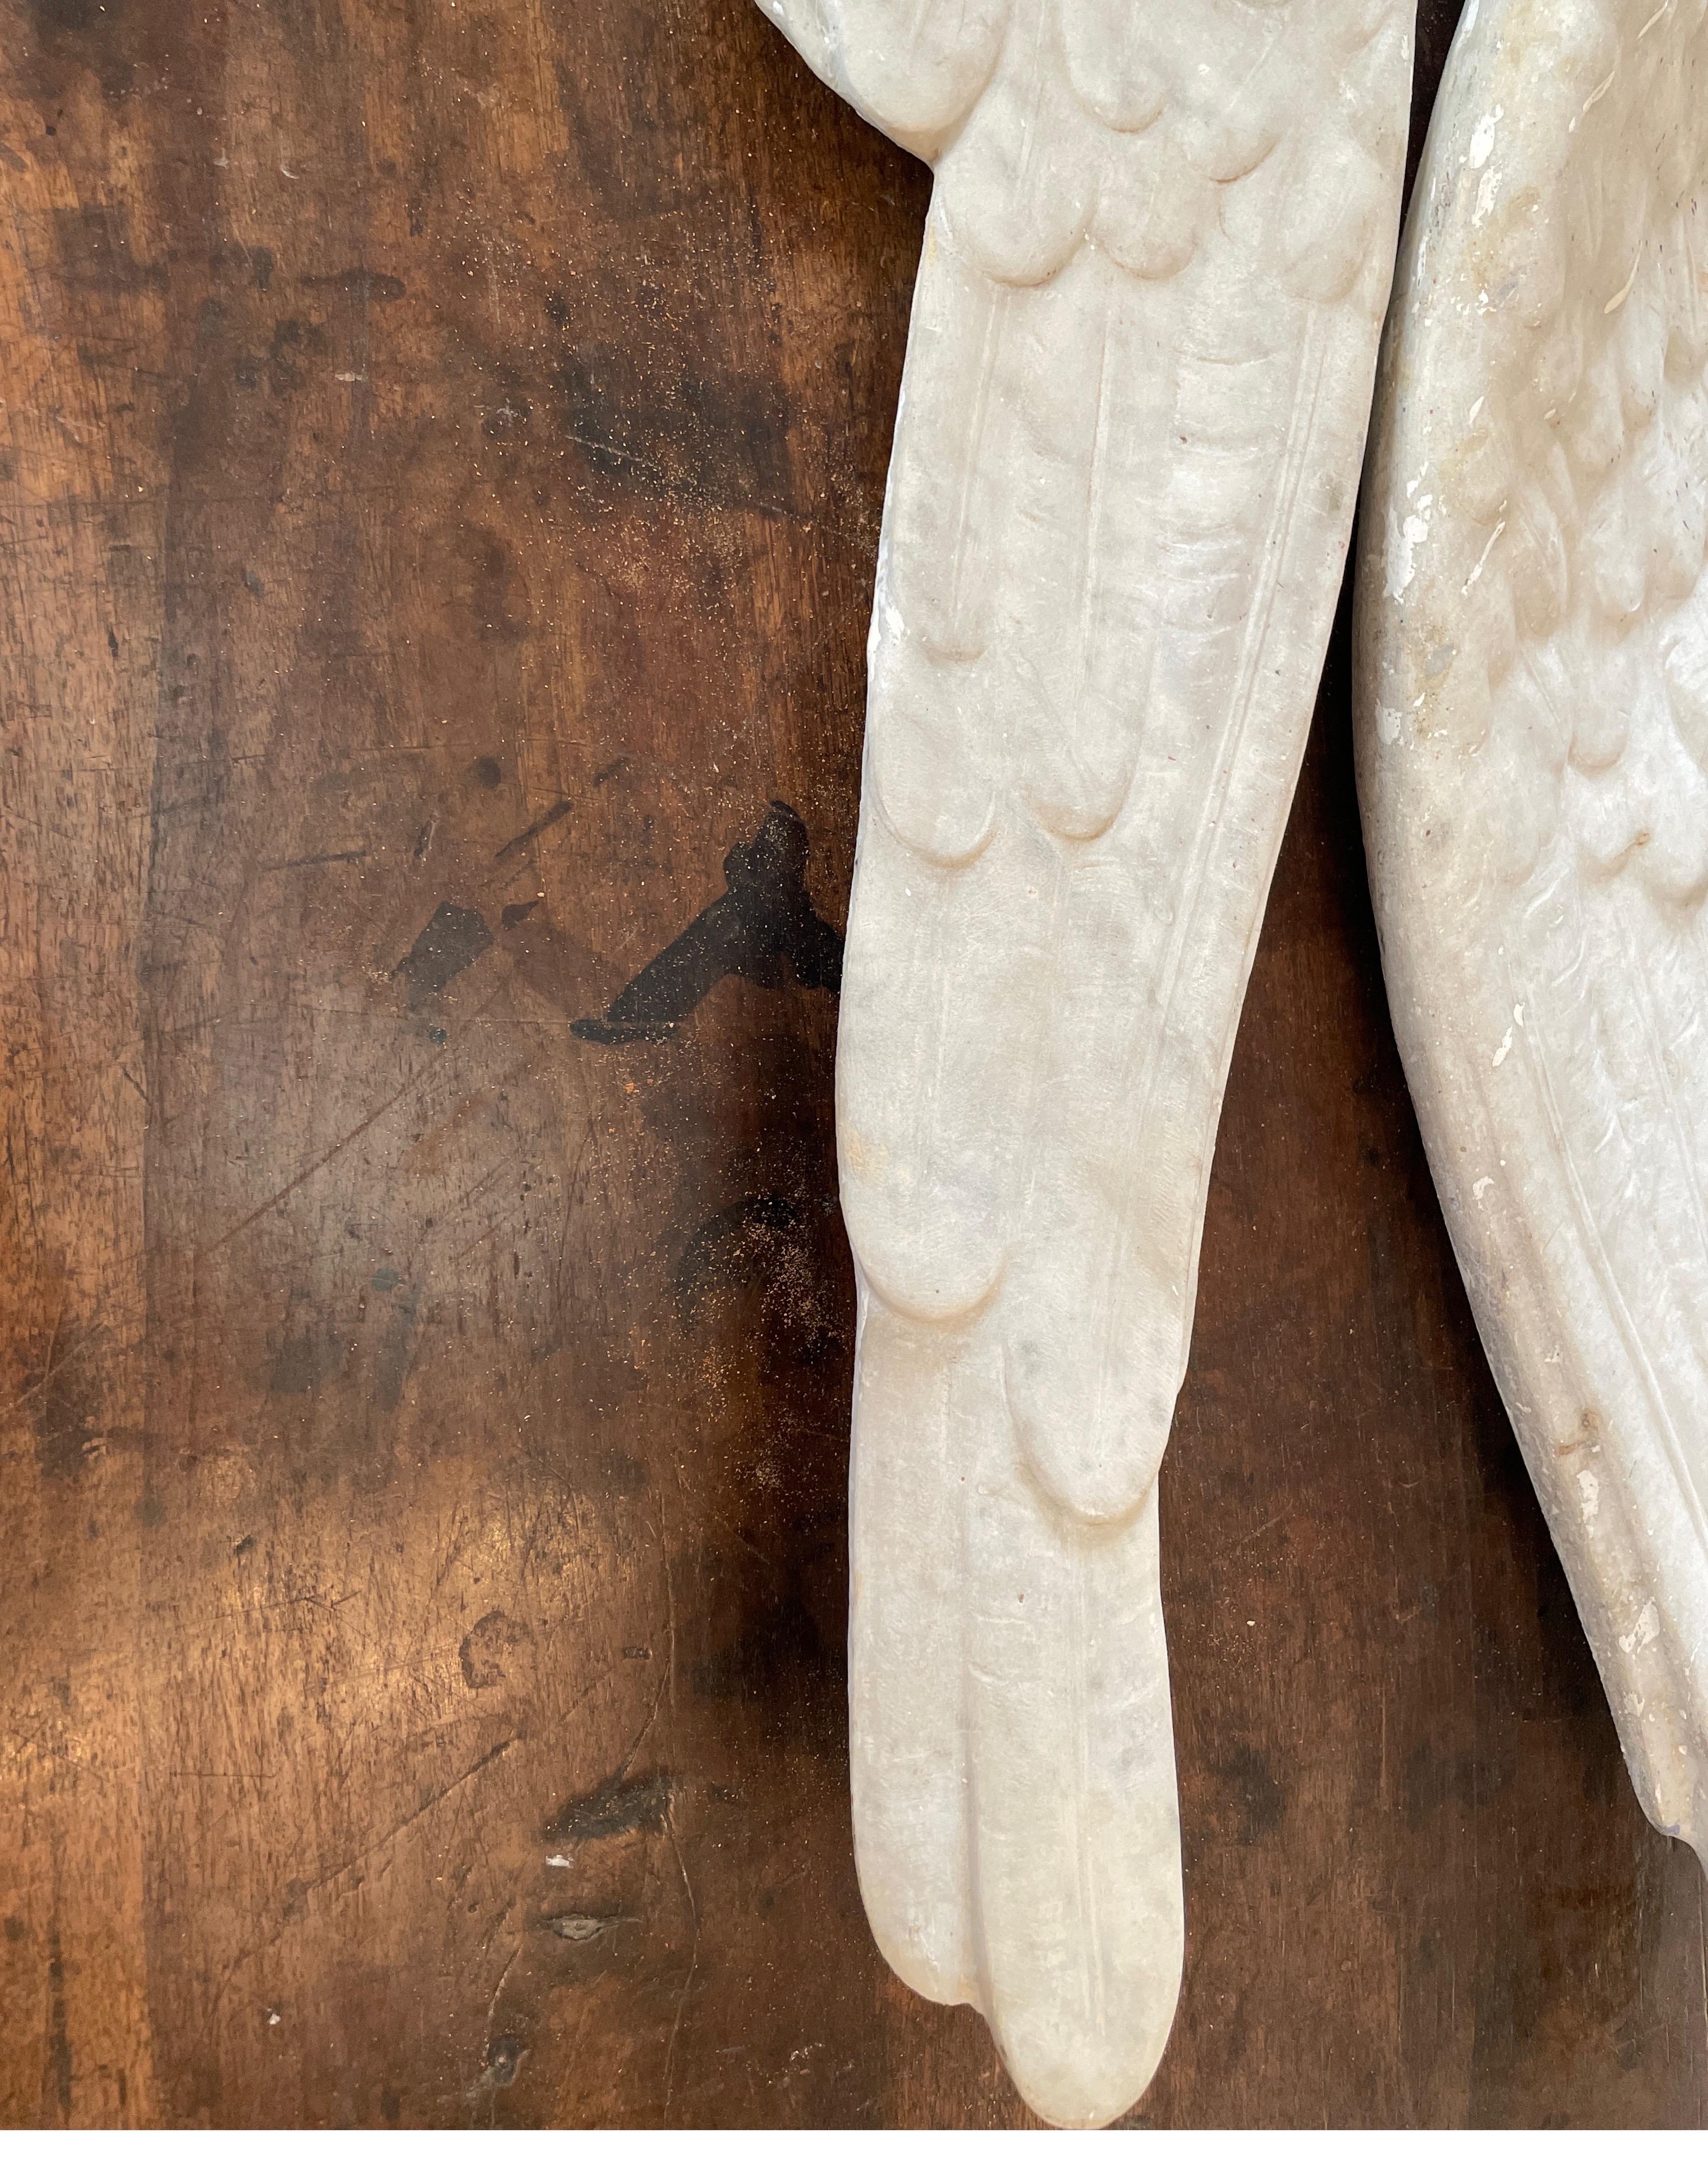 These Italian marble wings are so beautiful and nicely carved out of carrera marble. The details of the feathering is even prettier in person. They would make a conversation piece on a coffee table or great center piece on a dining table as well as